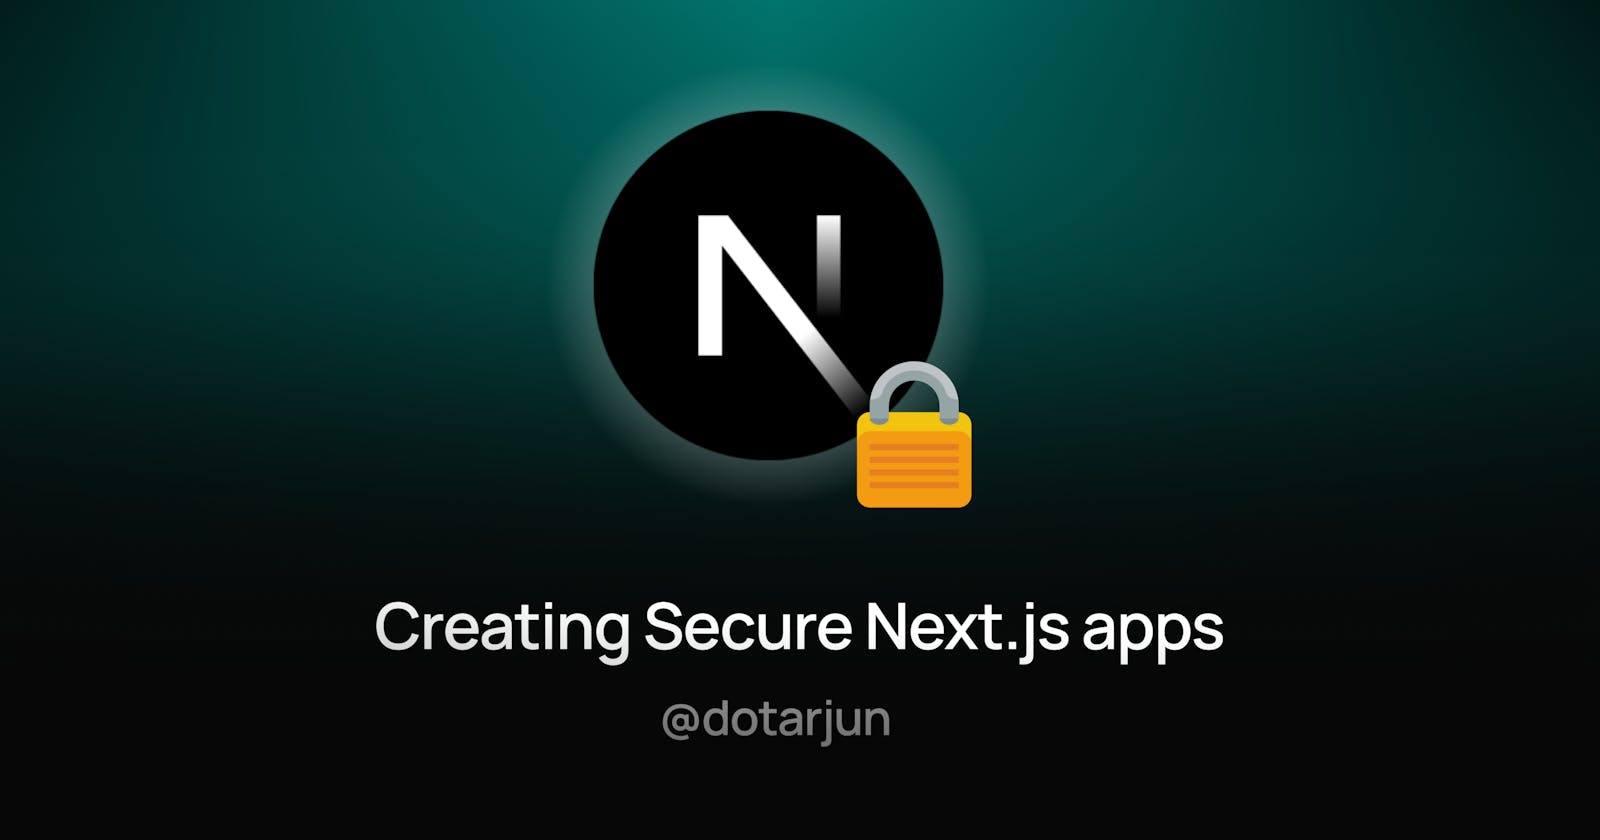 Secure Next.js apps by implementing Authentication - A Complete Guide